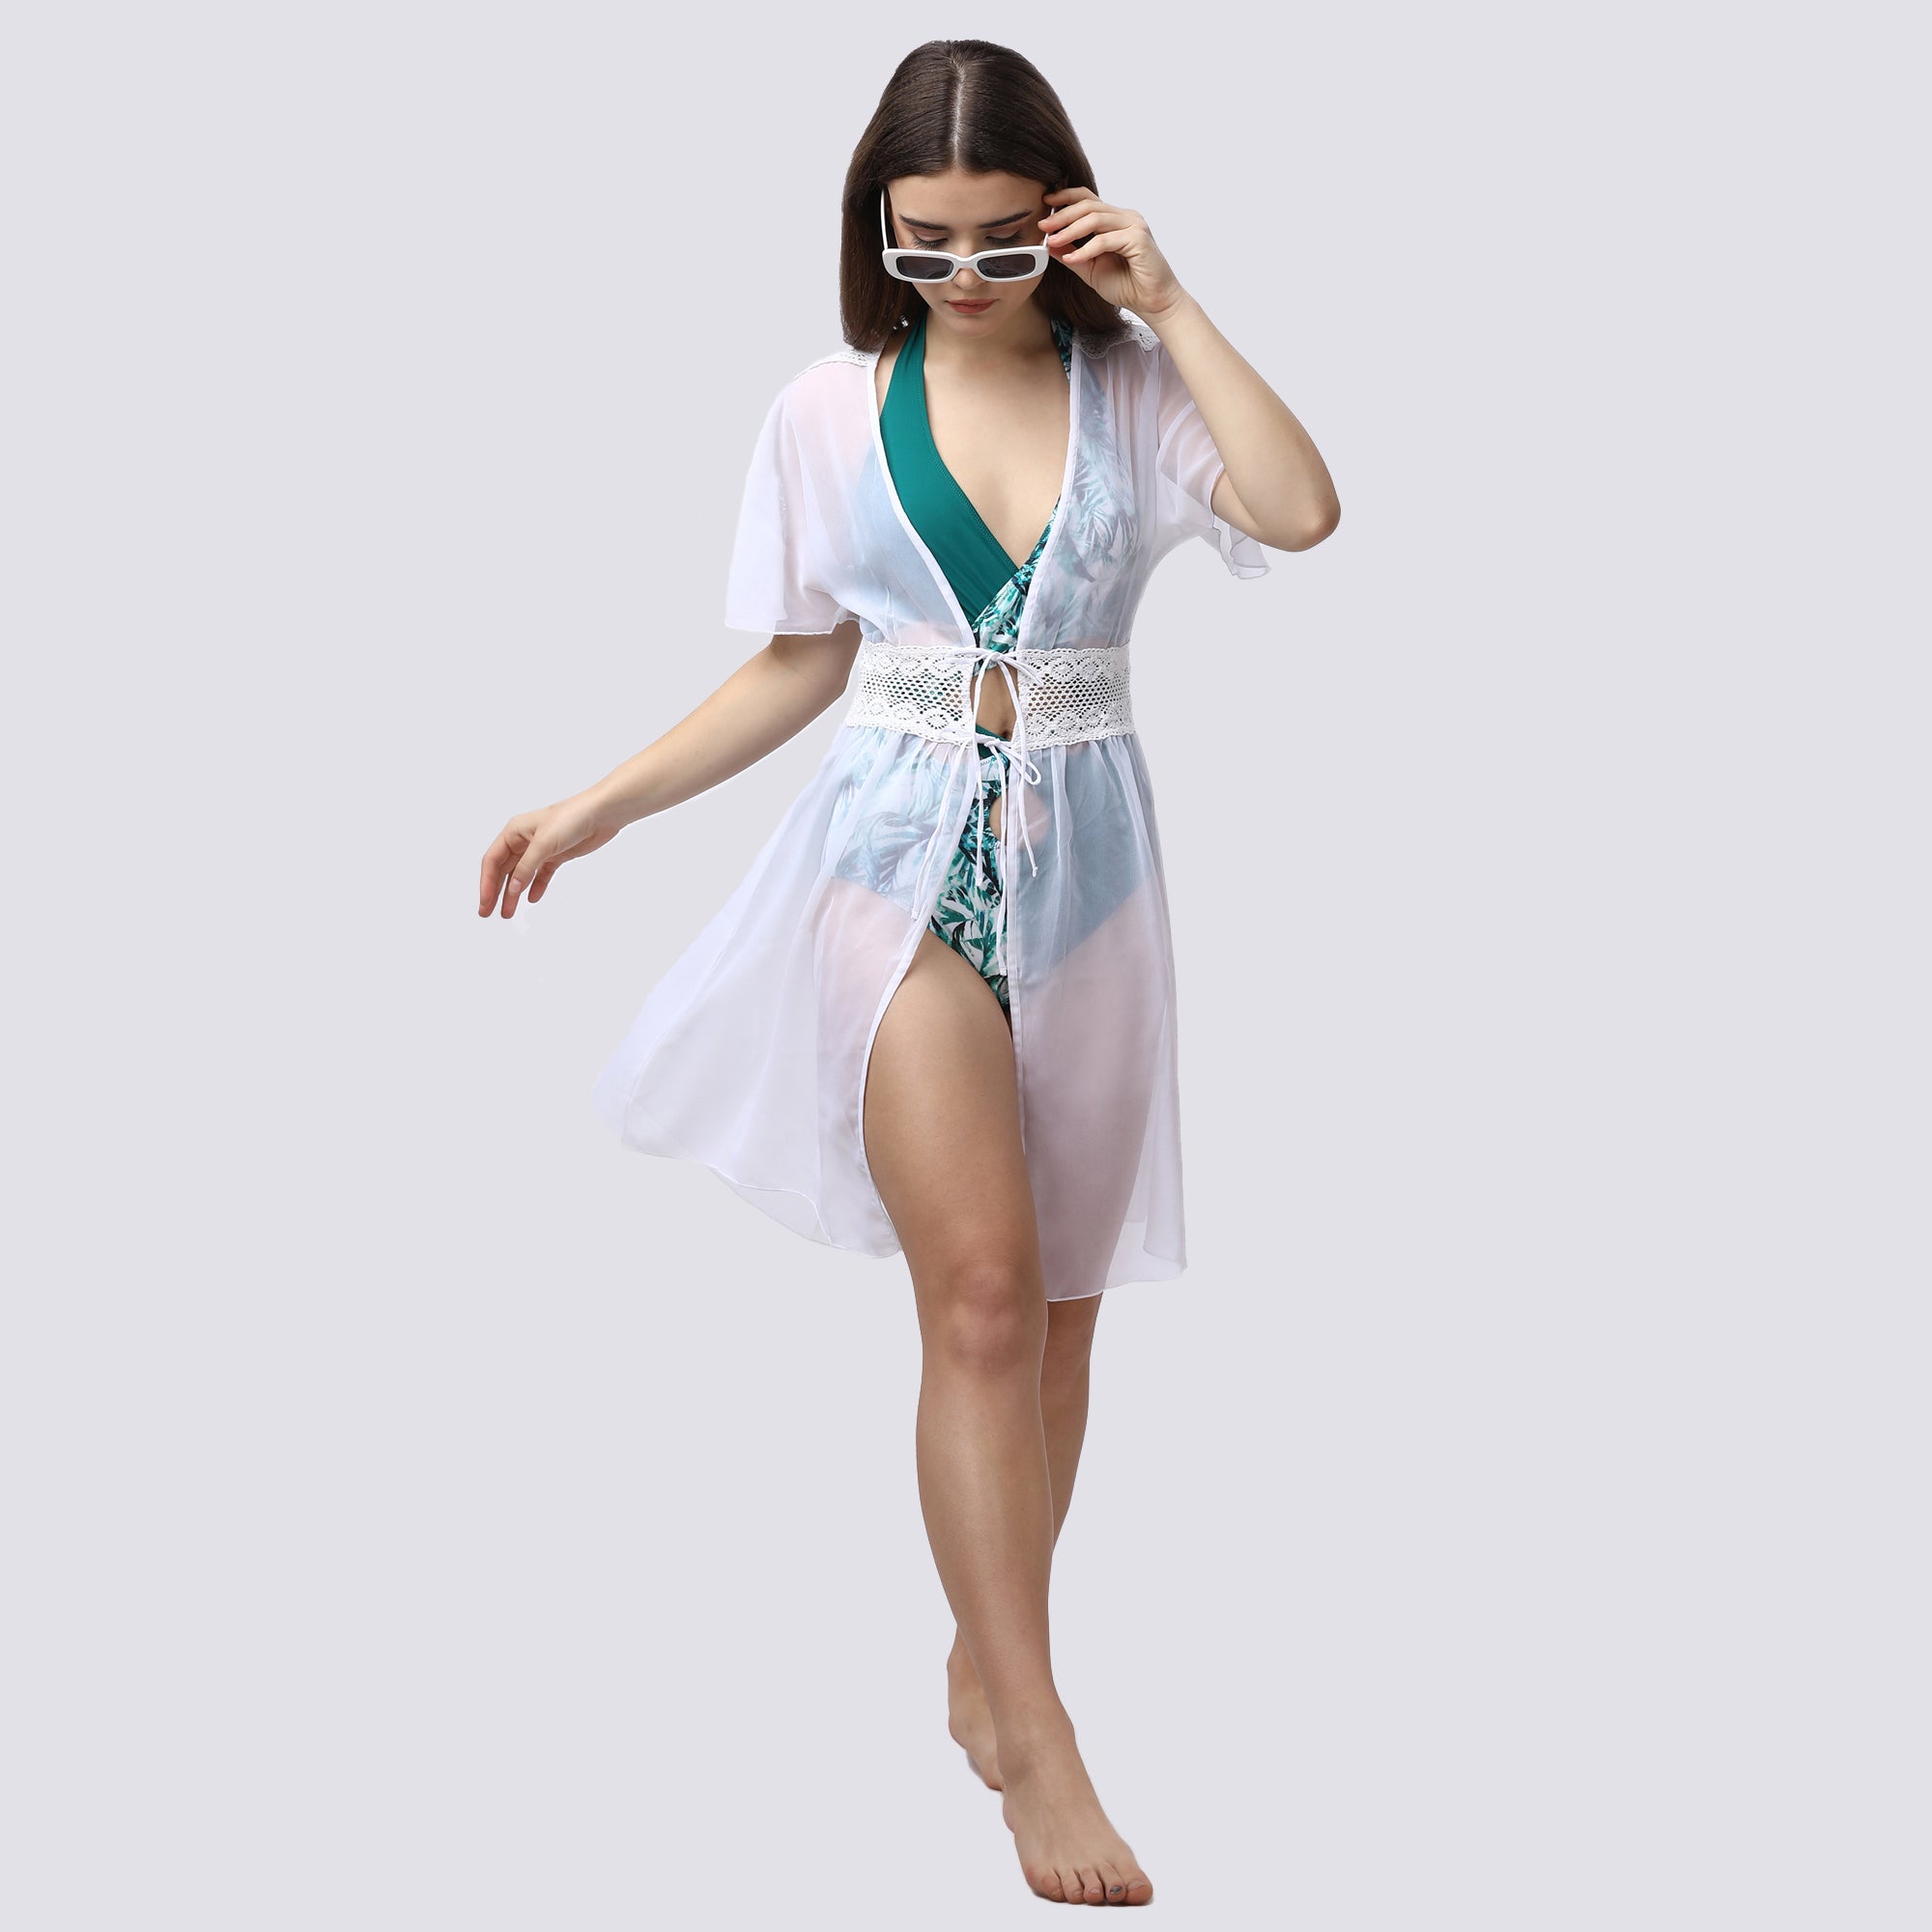 Crocheted Half Sleeves White Sheer Robe Cover Up- AQS-7